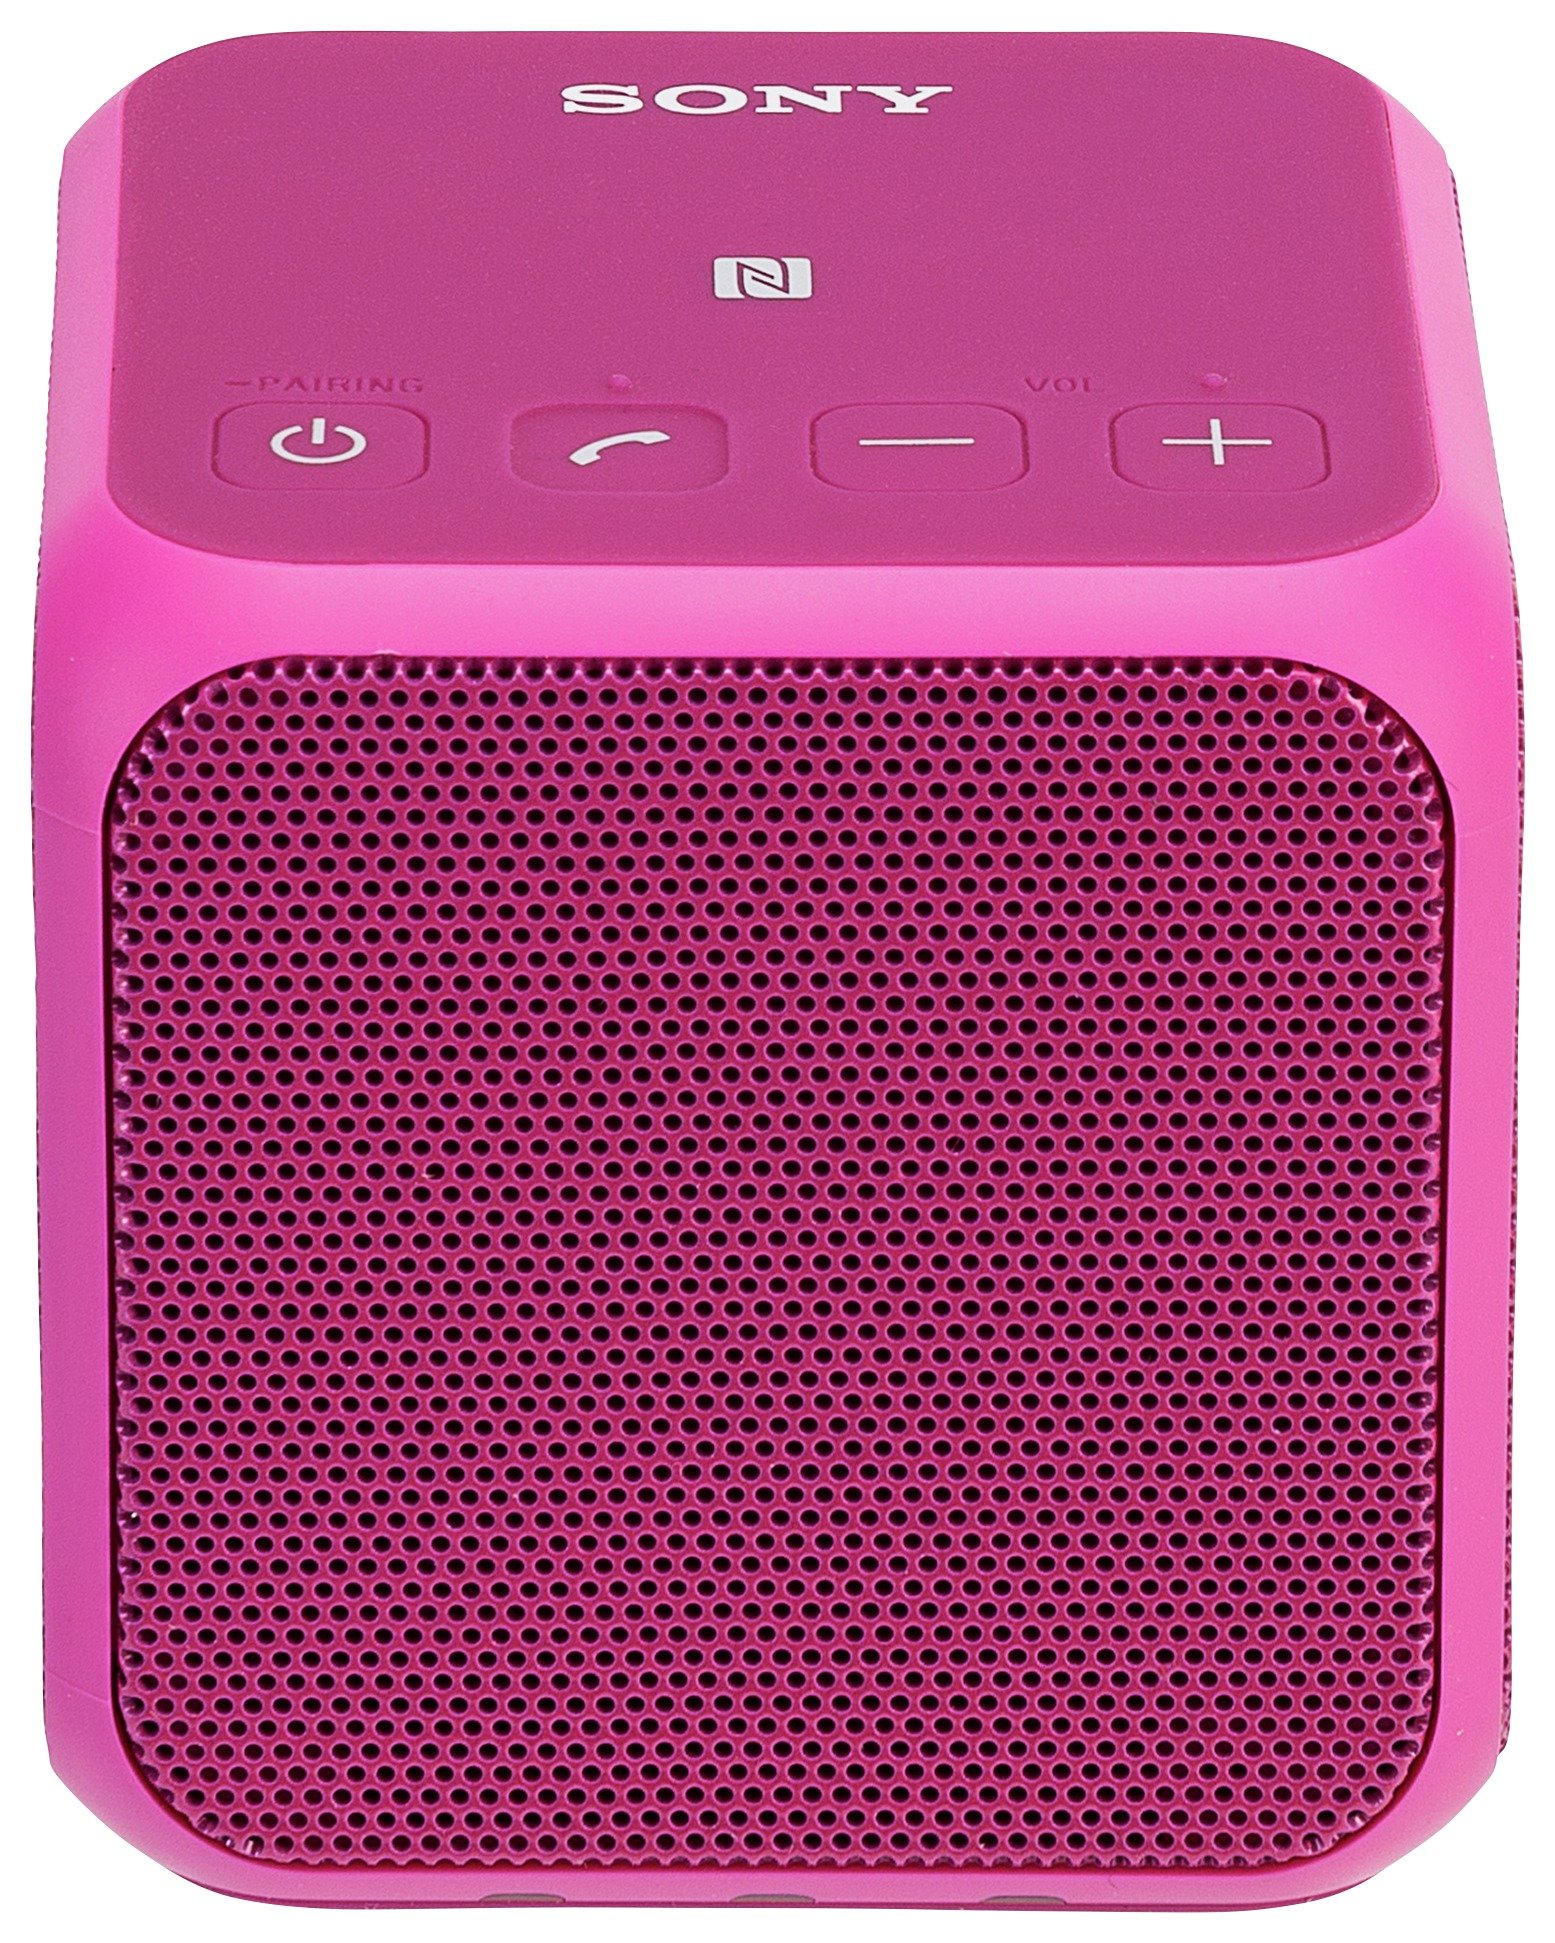 sony-srs-x11-portable-wireless-speaker-pink-review-review-electronics